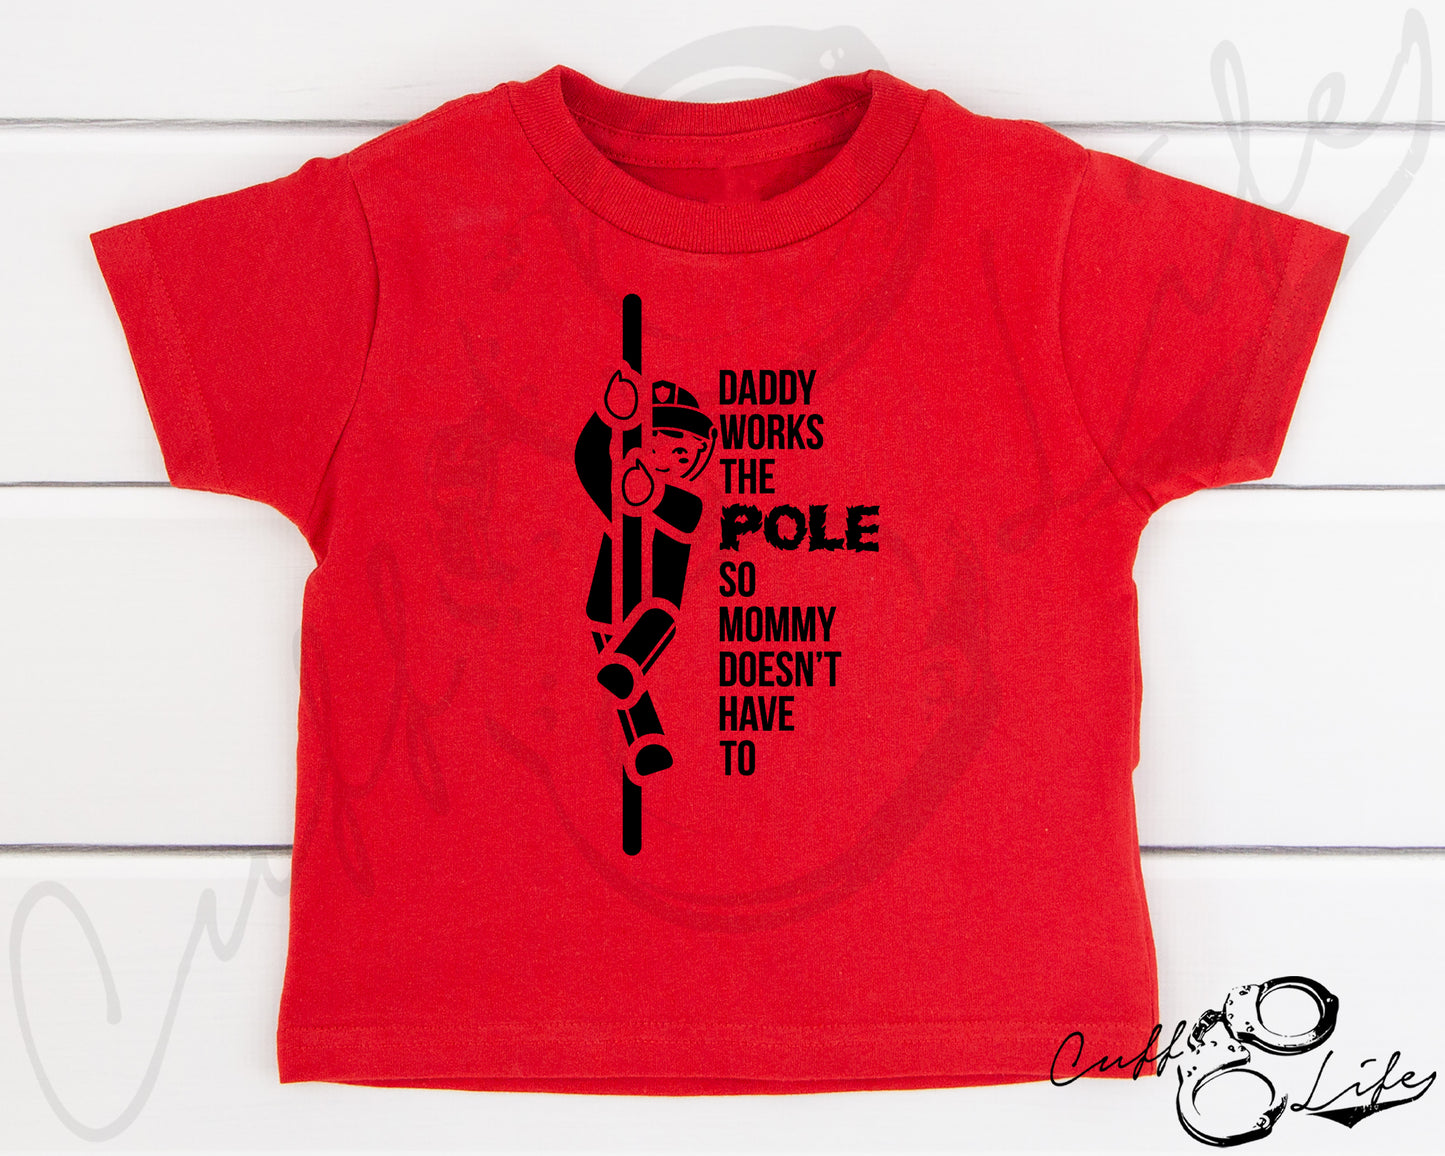 Daddy Works the Pole © - Toddler/Youth T-Shirt